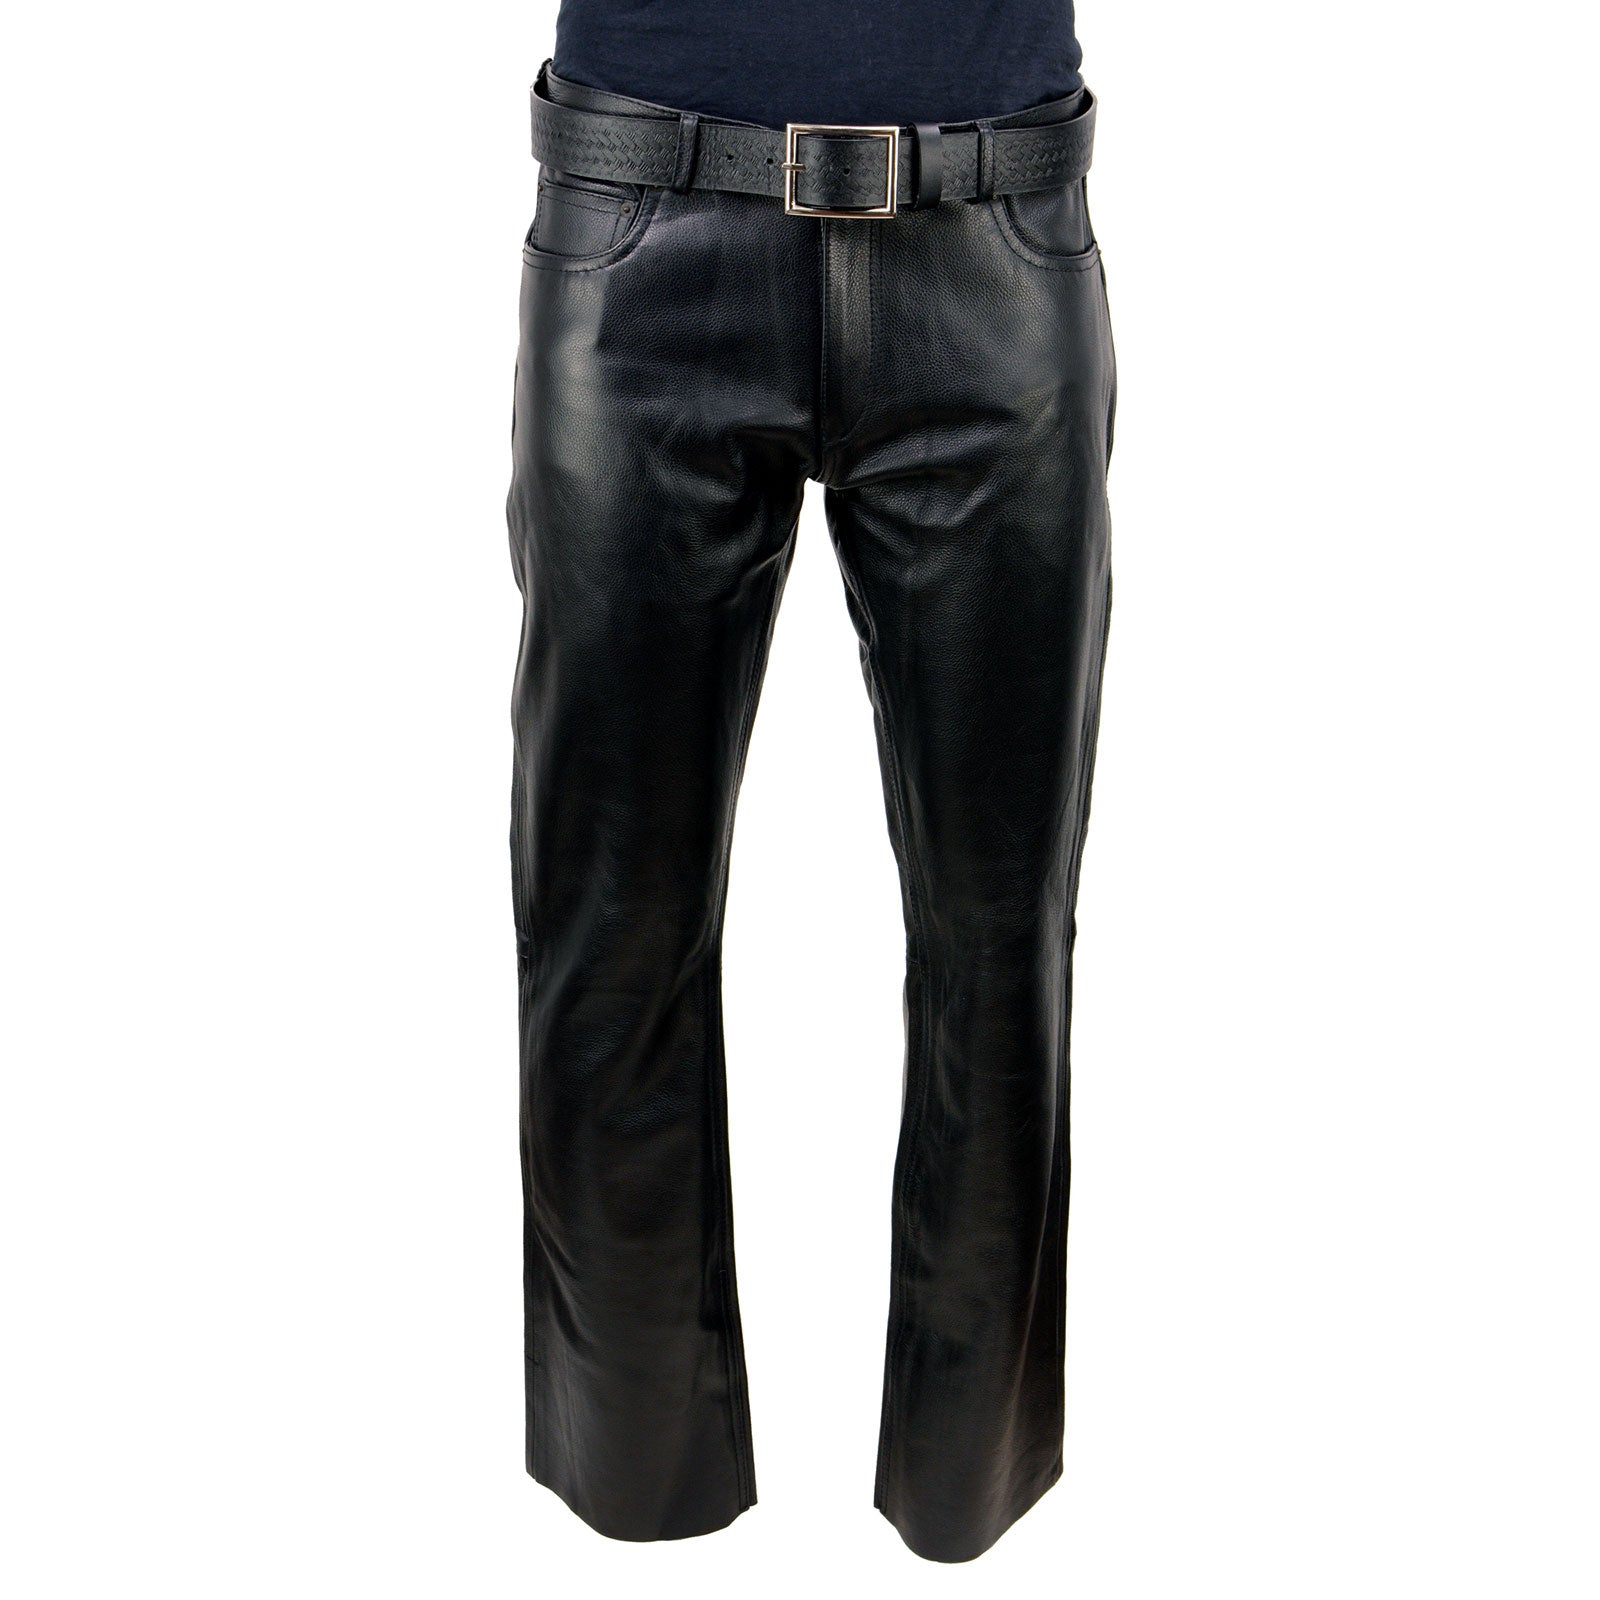 Leather Pants for Motorcycle Riding